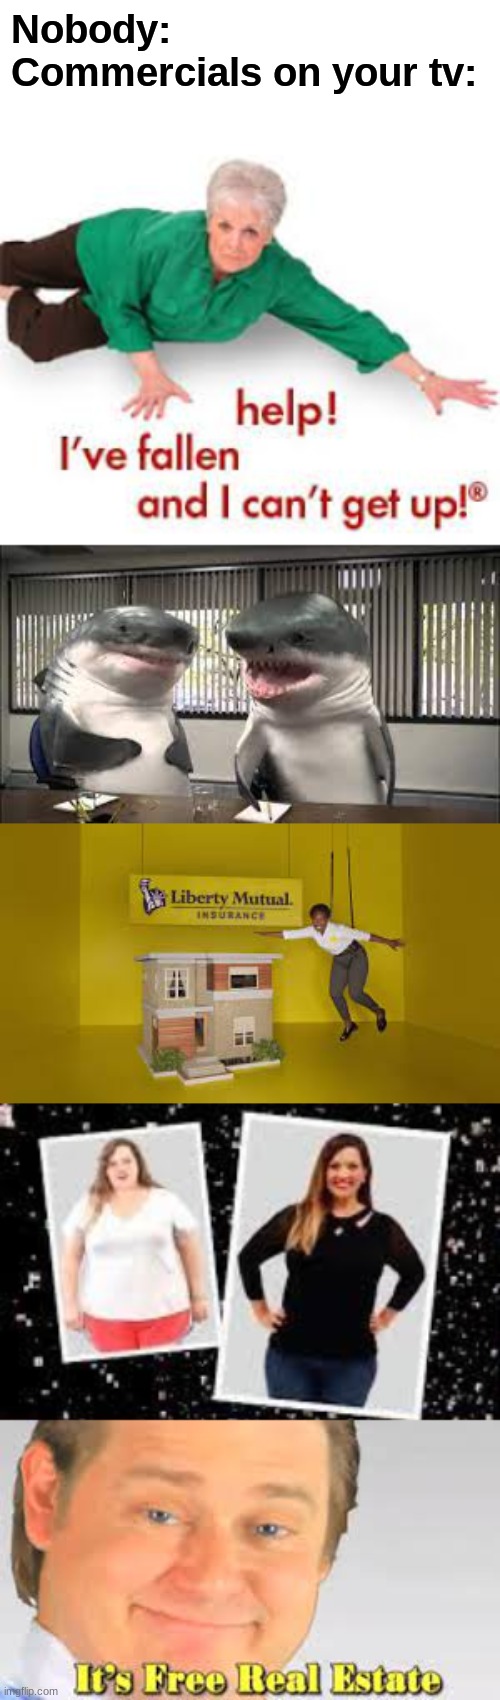 Commercials on your TV |  Nobody:
Commercials on your tv: | image tagged in commercials,help i've fallen and i can't get up,liberty mutual,sharks,its free real estate,dieting | made w/ Imgflip meme maker